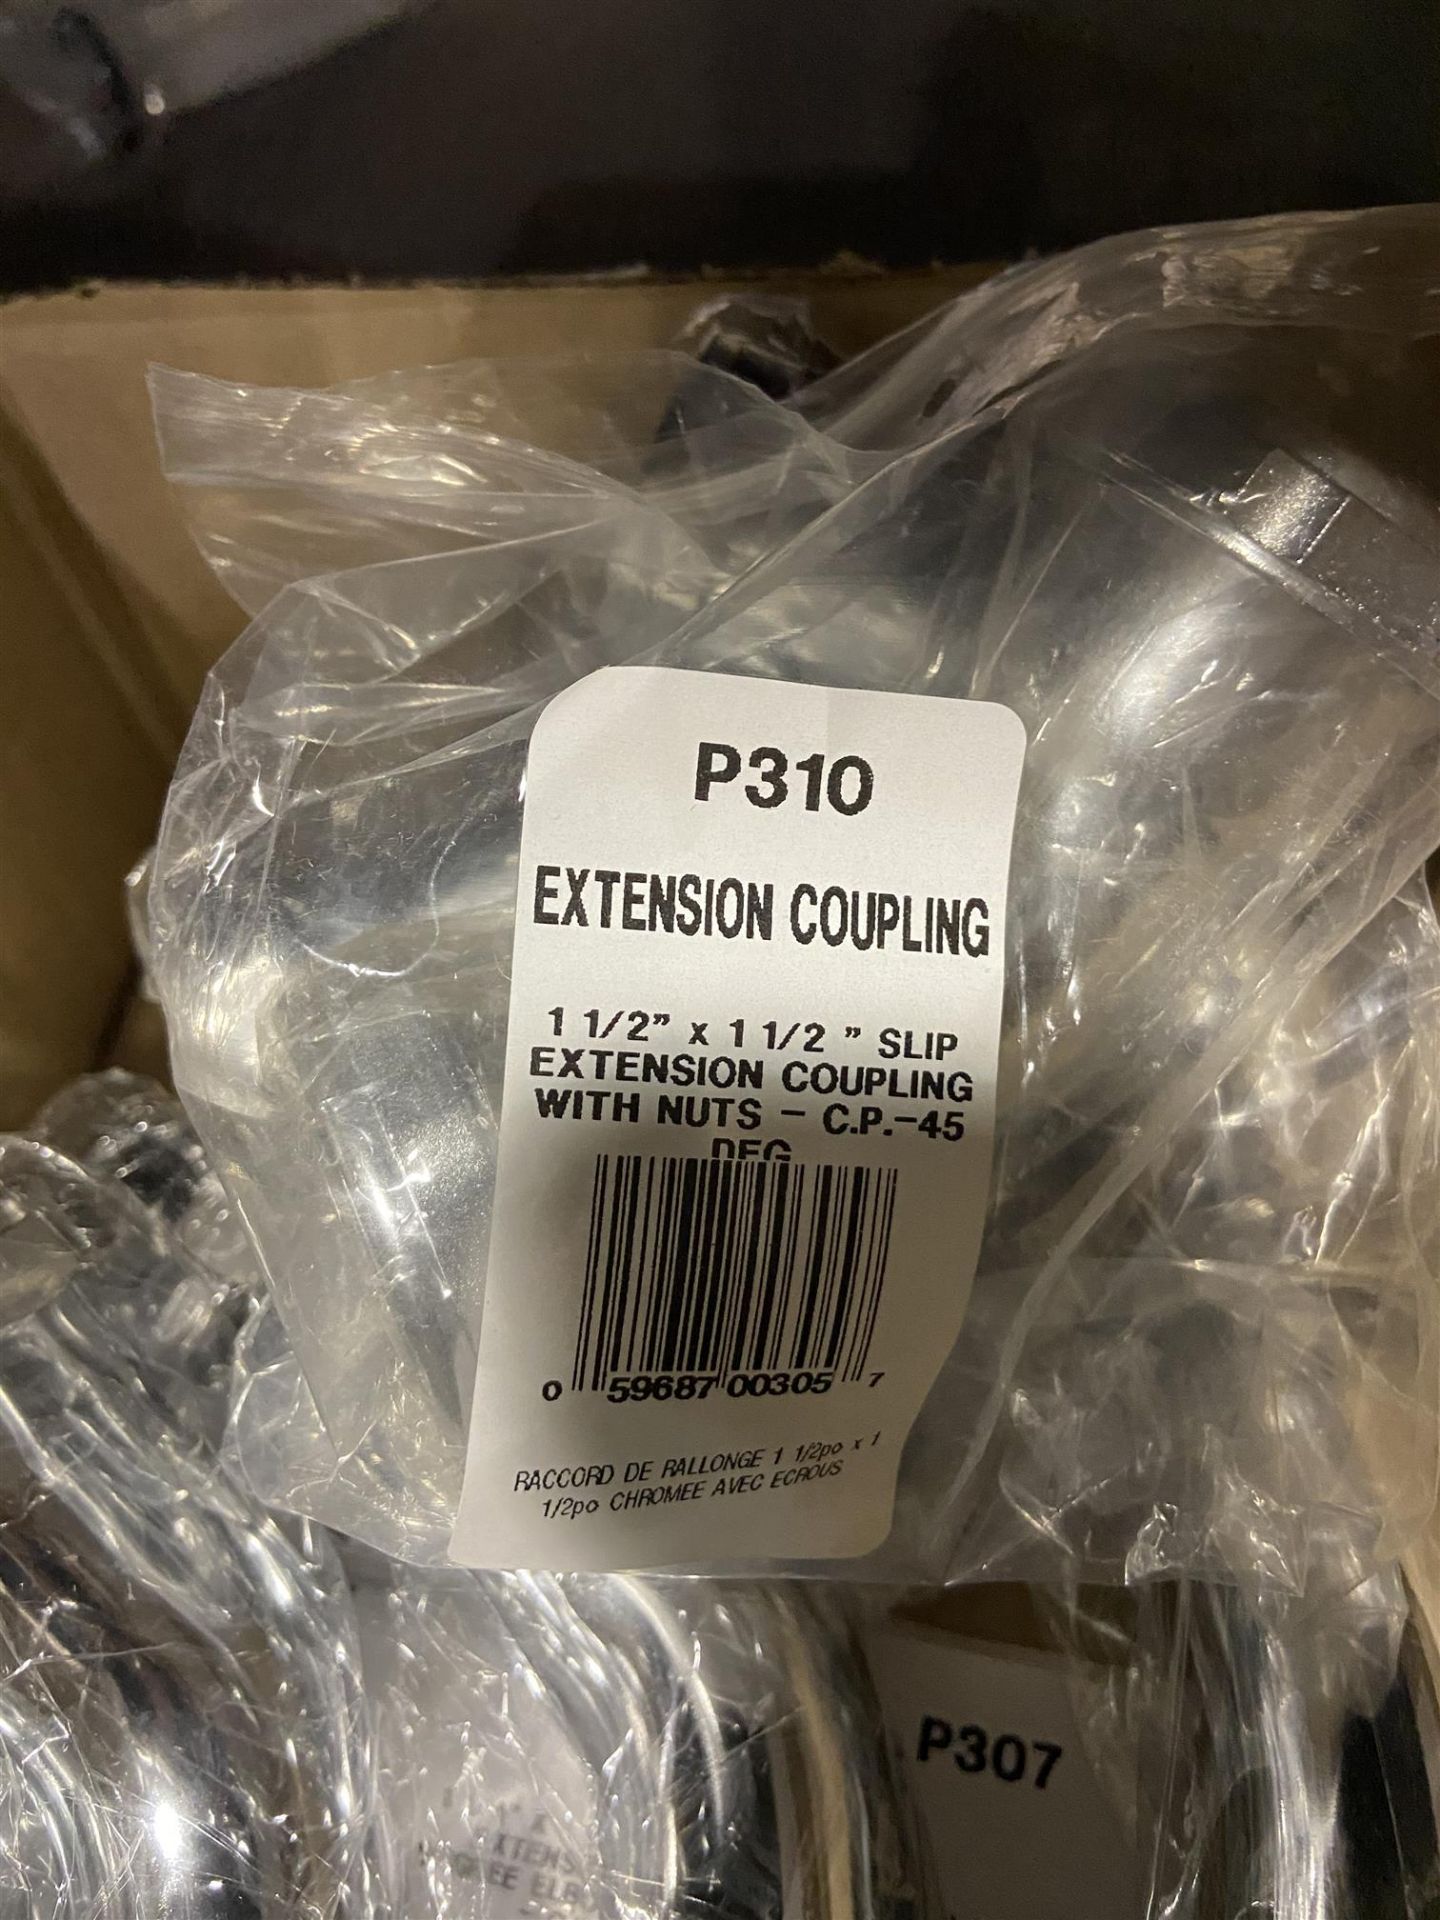 P310 - EXTENSION COUPLING - EXTENSION COUPLING W/NUTS - 28PCS - Image 3 of 4